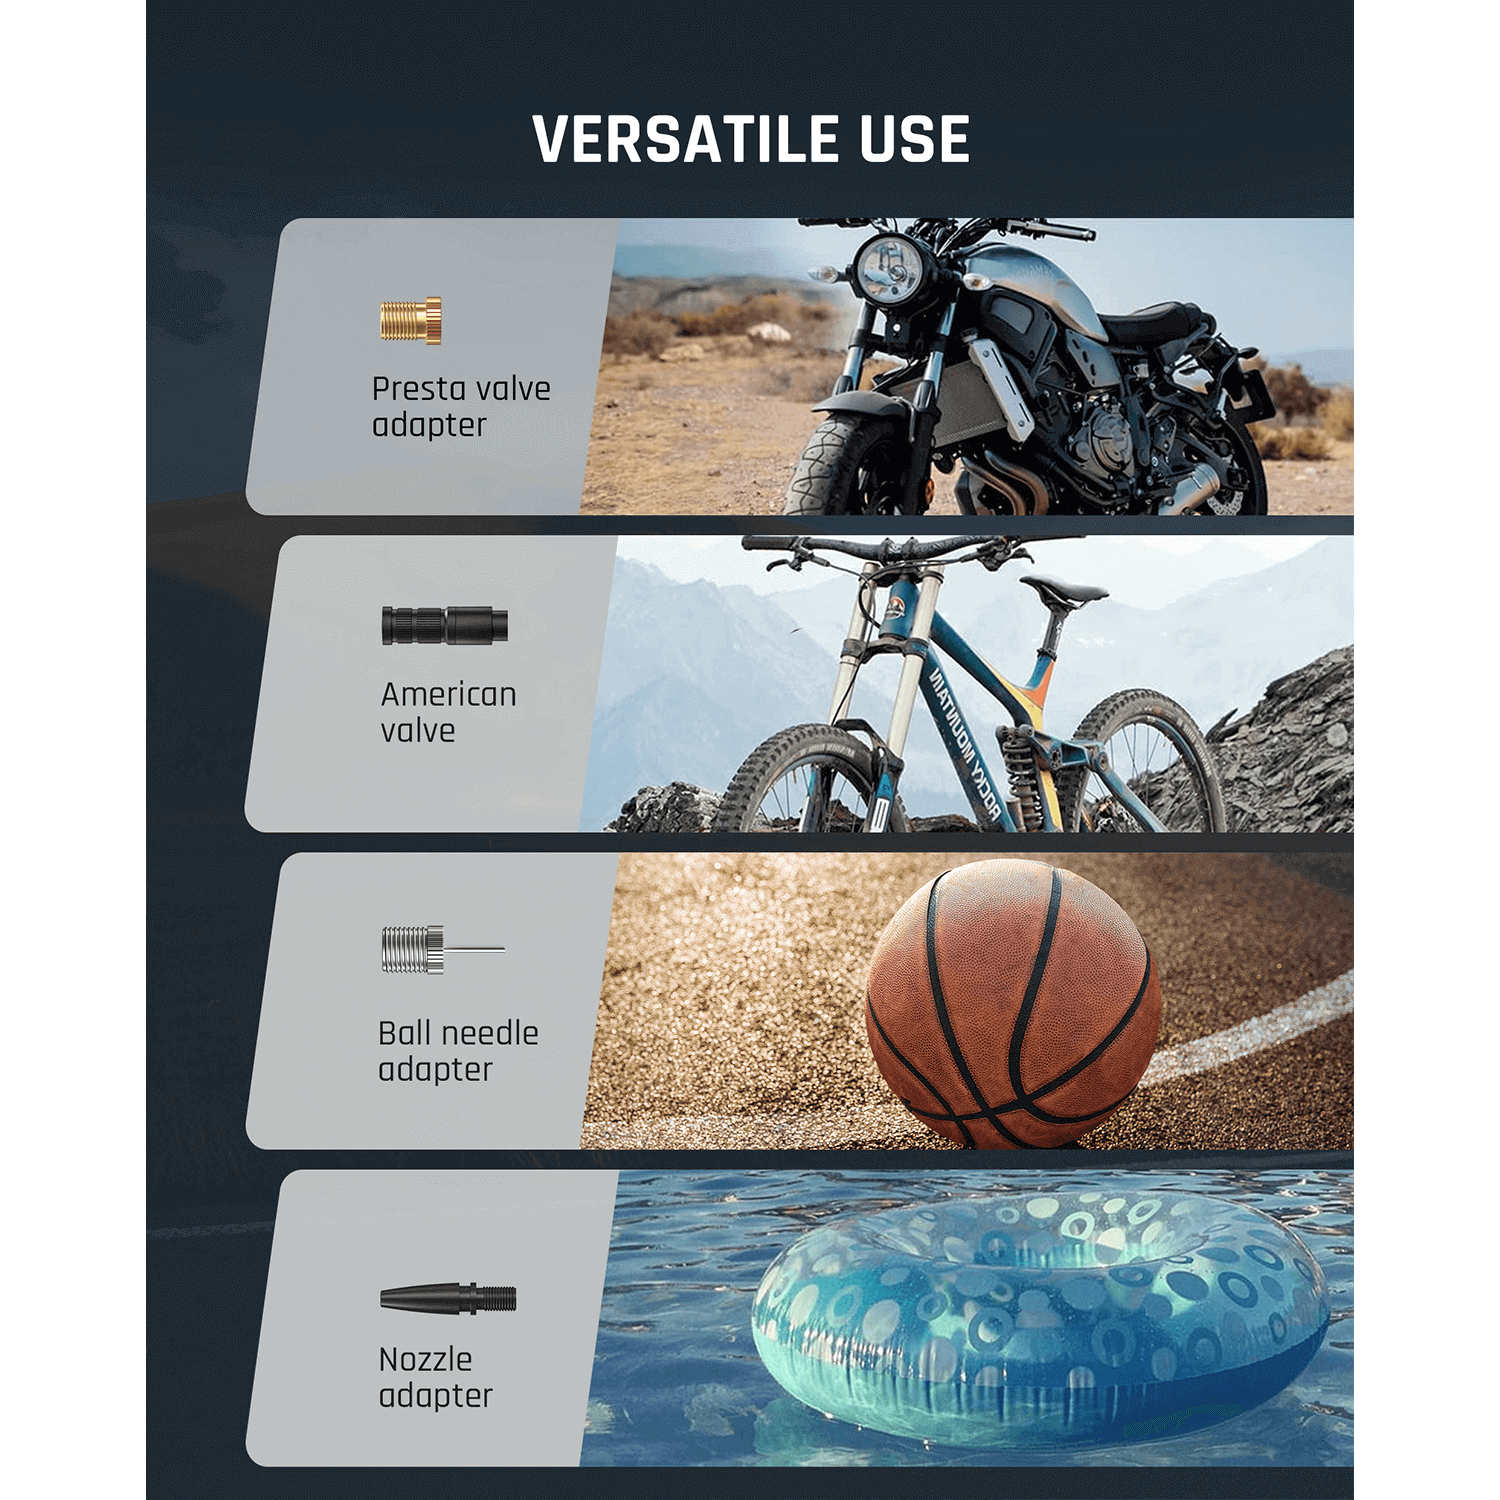 Fanttik X8 Portable Tire Inflator, Ultra-Lightweight for inflating motorcycles, bikes, cars, balls, swim rings and other inflatables.